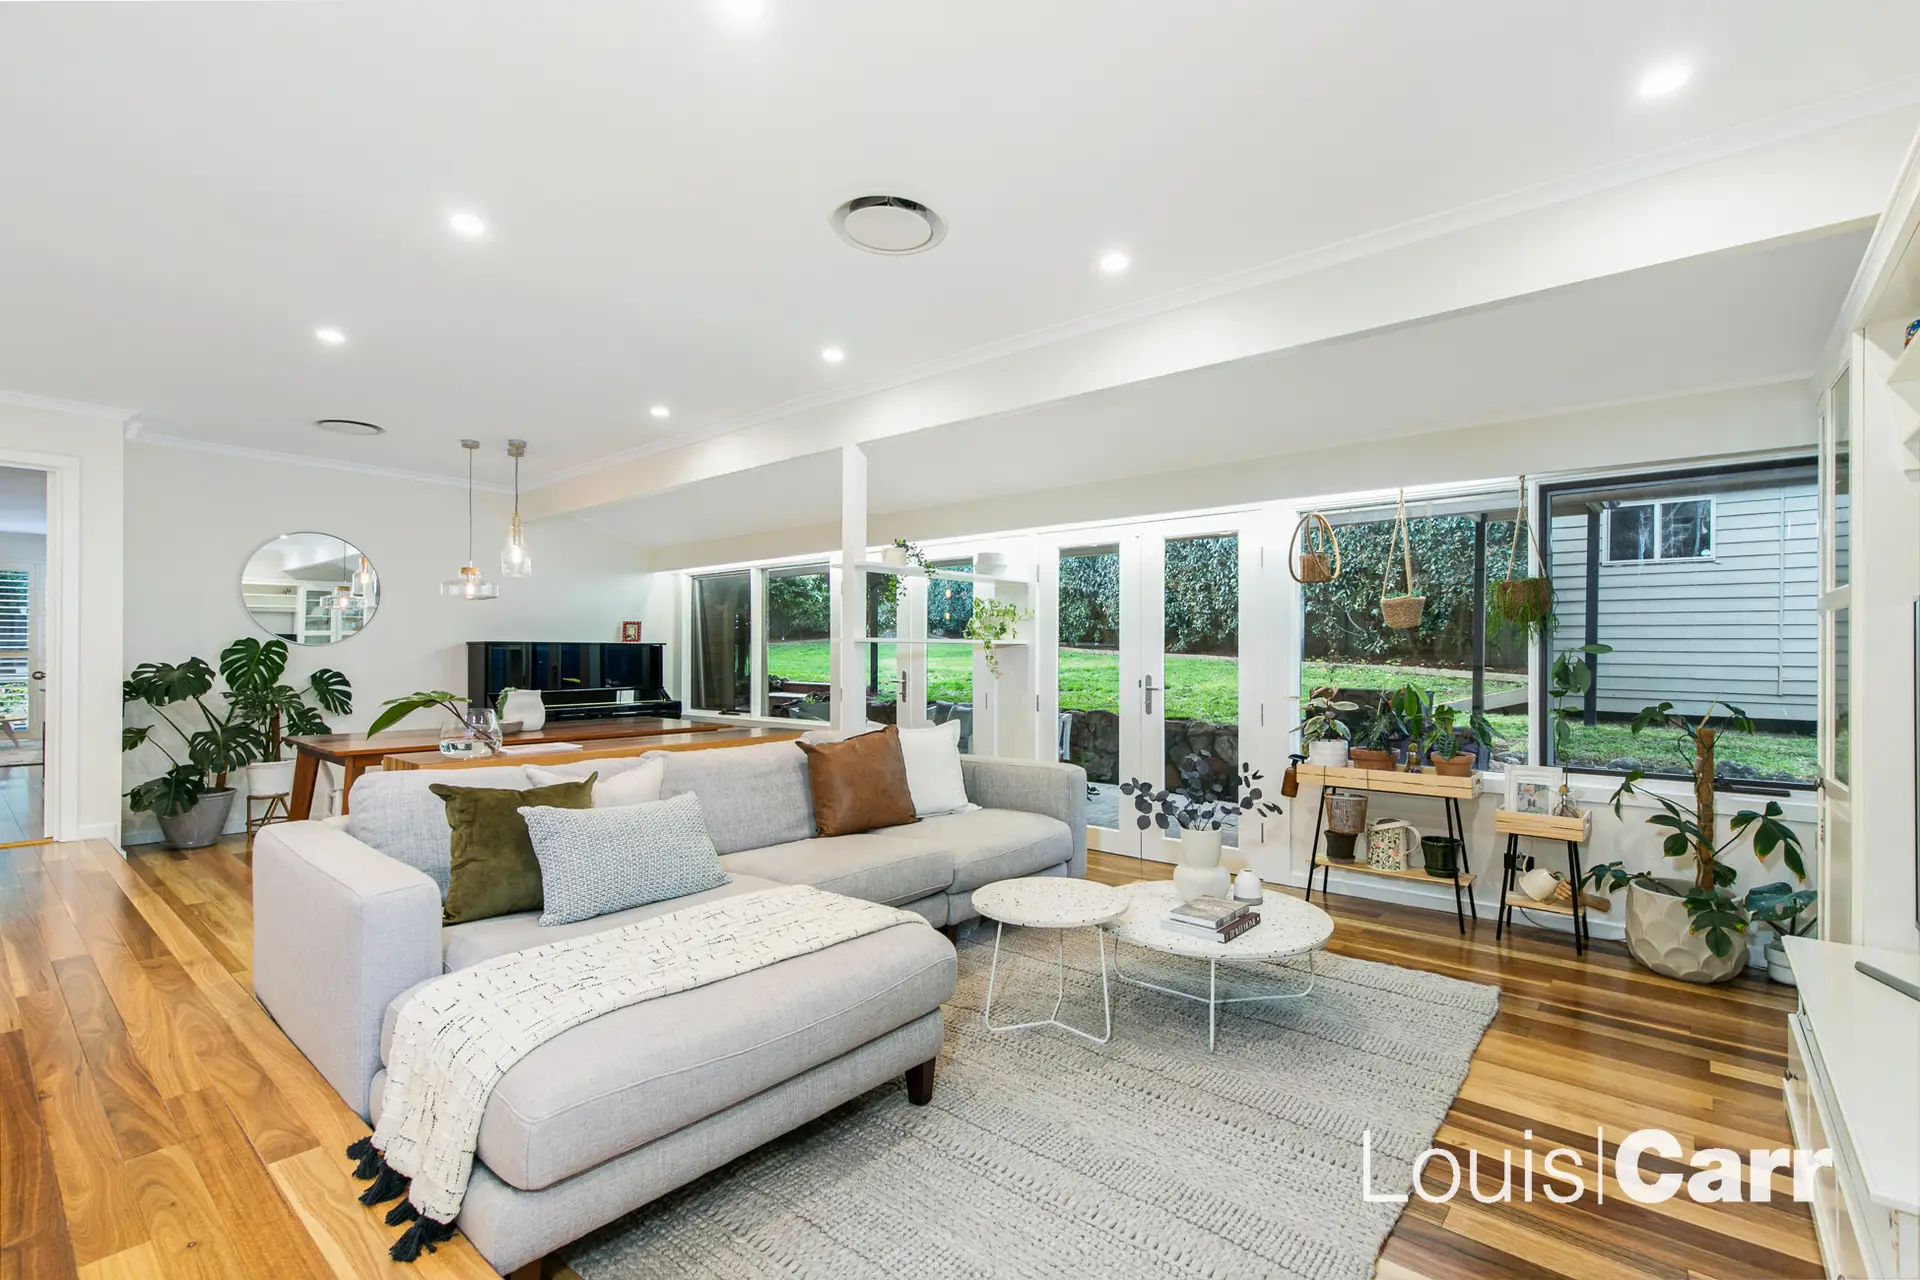 Photo #2: 8 Kalumna Close, Cherrybrook - Sold by Louis Carr Real Estate